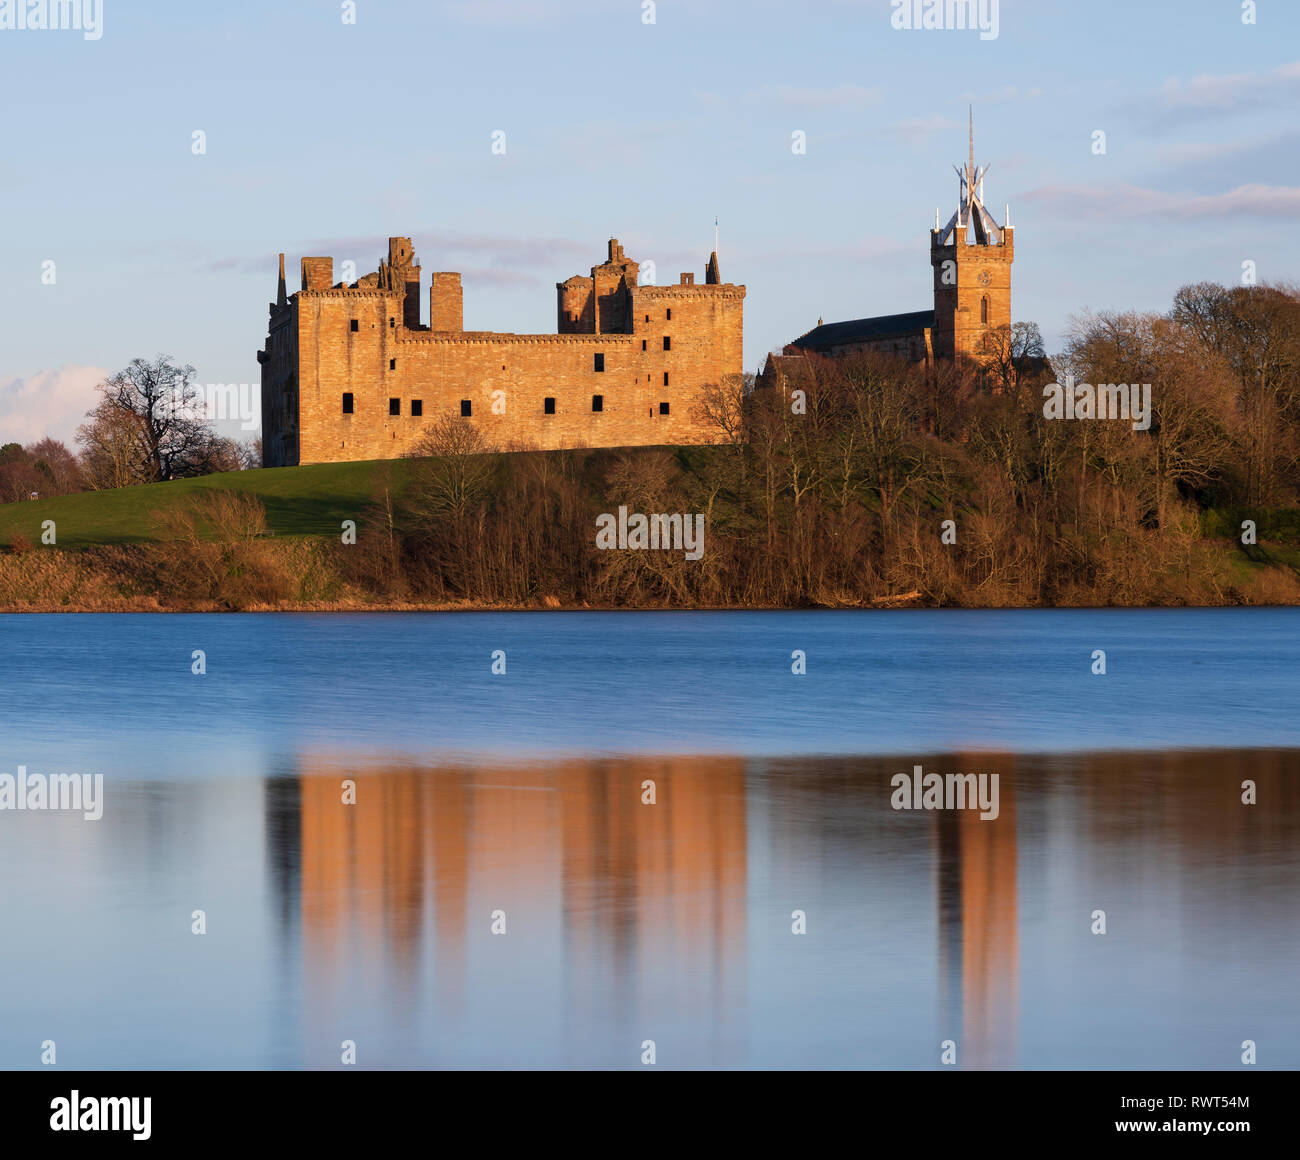 View of Linlithgow Palace in Linlithgow, West Lothian, Scotland, UK. Birthplace of Mary Queen of Scots. Stock Photo